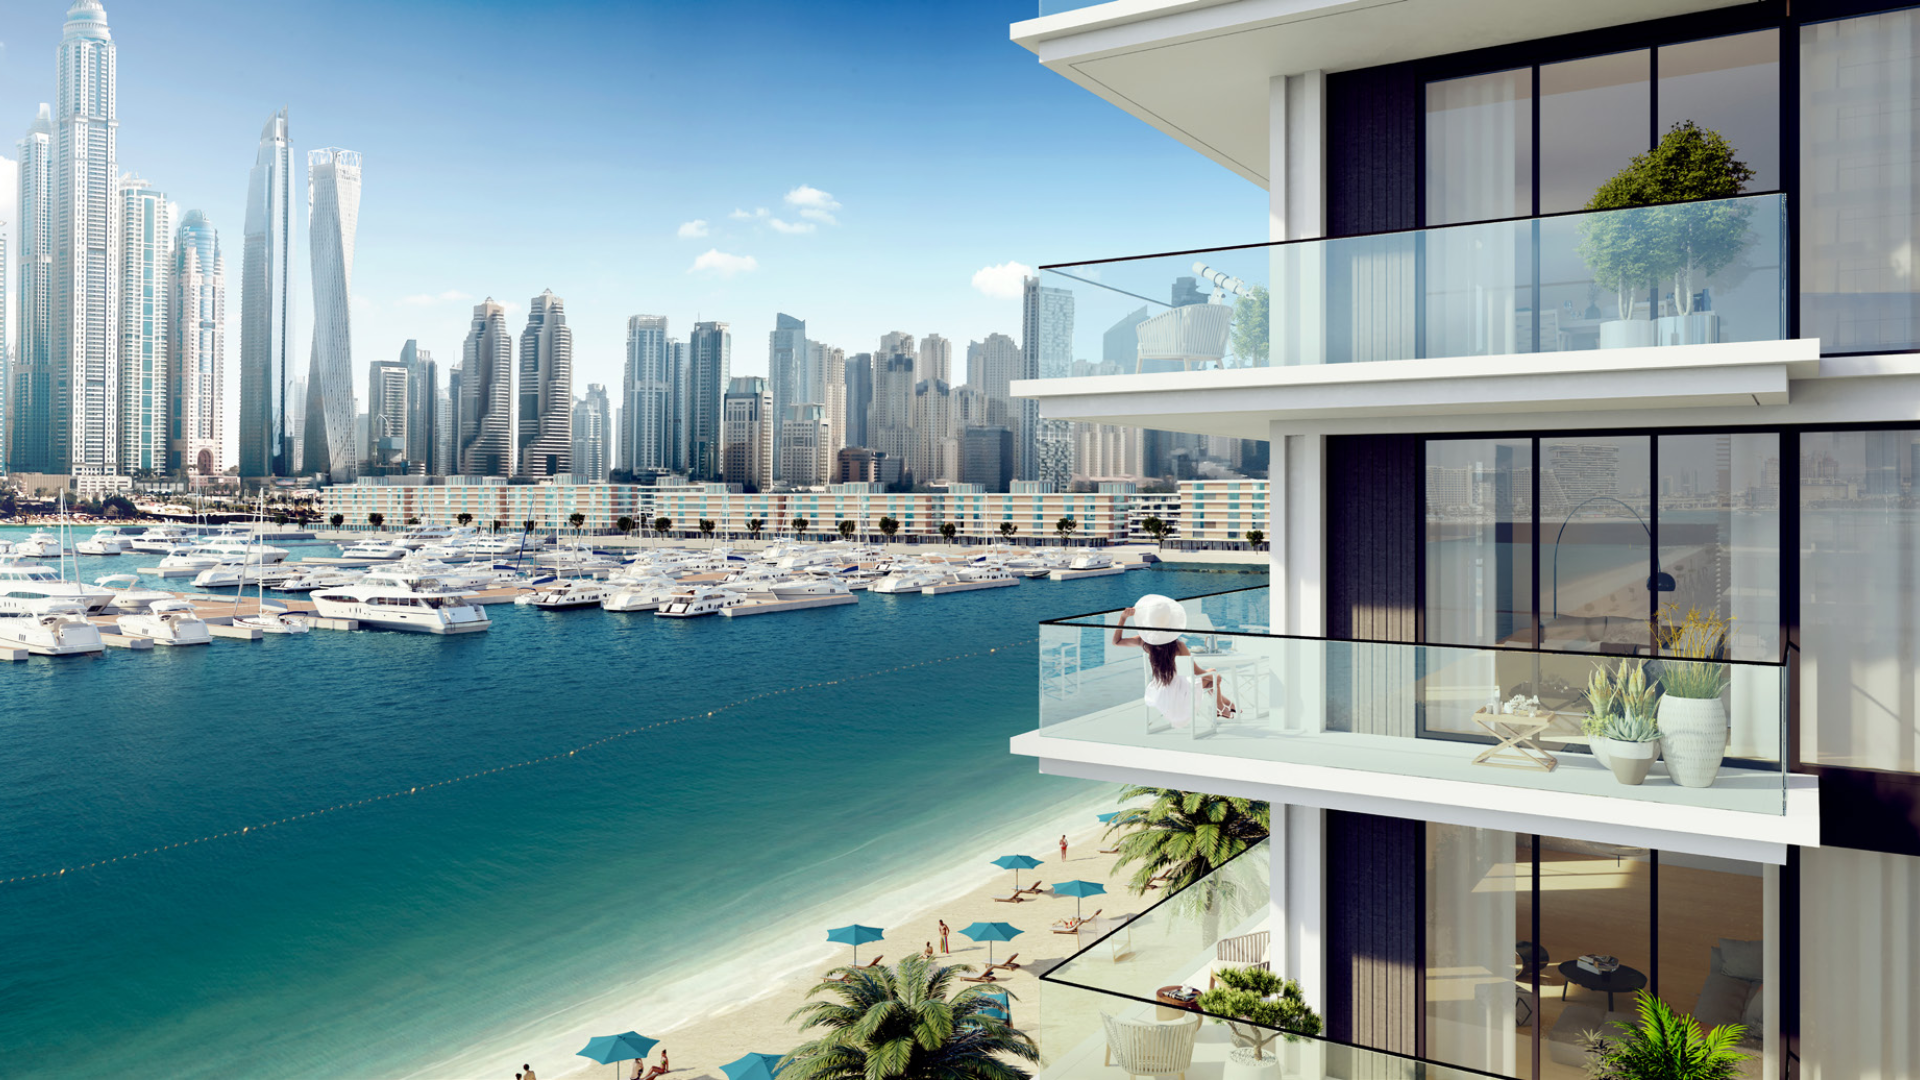  Bedroom Apartment For Sale Emaar Beachfront Lp08868 4a8be89ccf4cd80.png